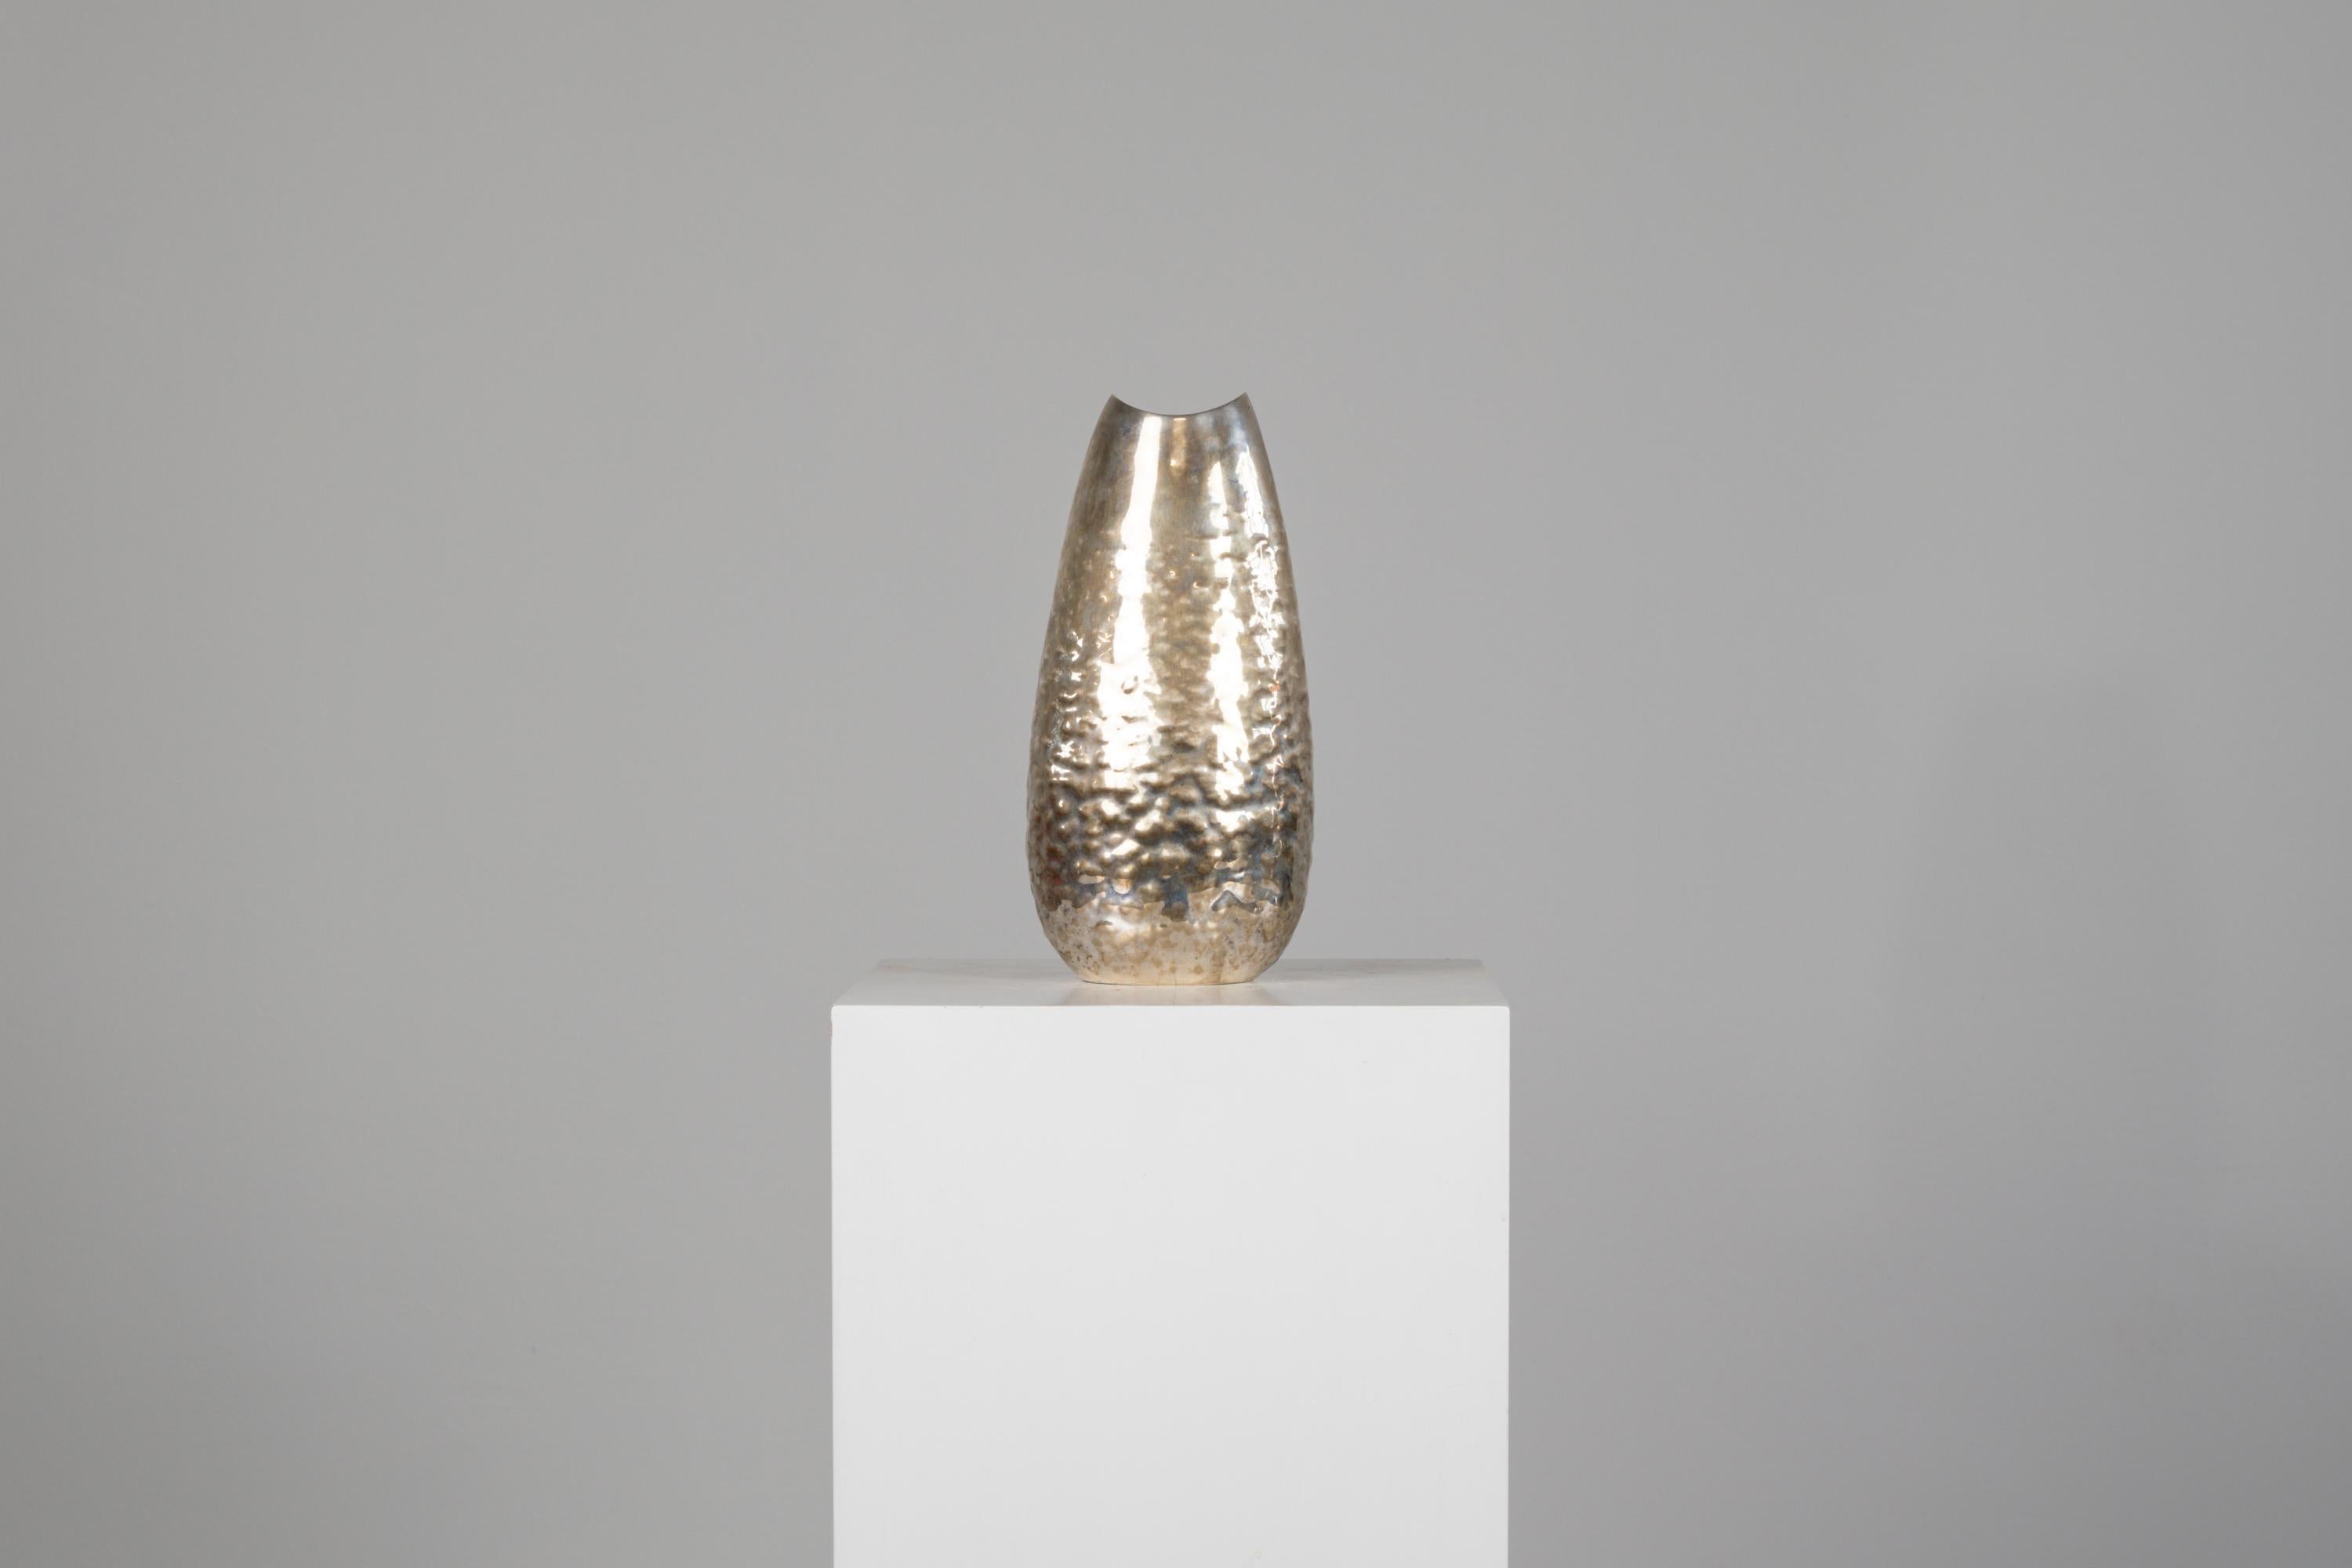 Ovoidal vase in hammered silver with a light ashlar surface.
This elegant centerpiece was designed by Luigi Genazzi and produced by Calderoni Jewels.

Marked under the base with the manufacturer's mark (Calderoni Jewellery)

Datable in the second